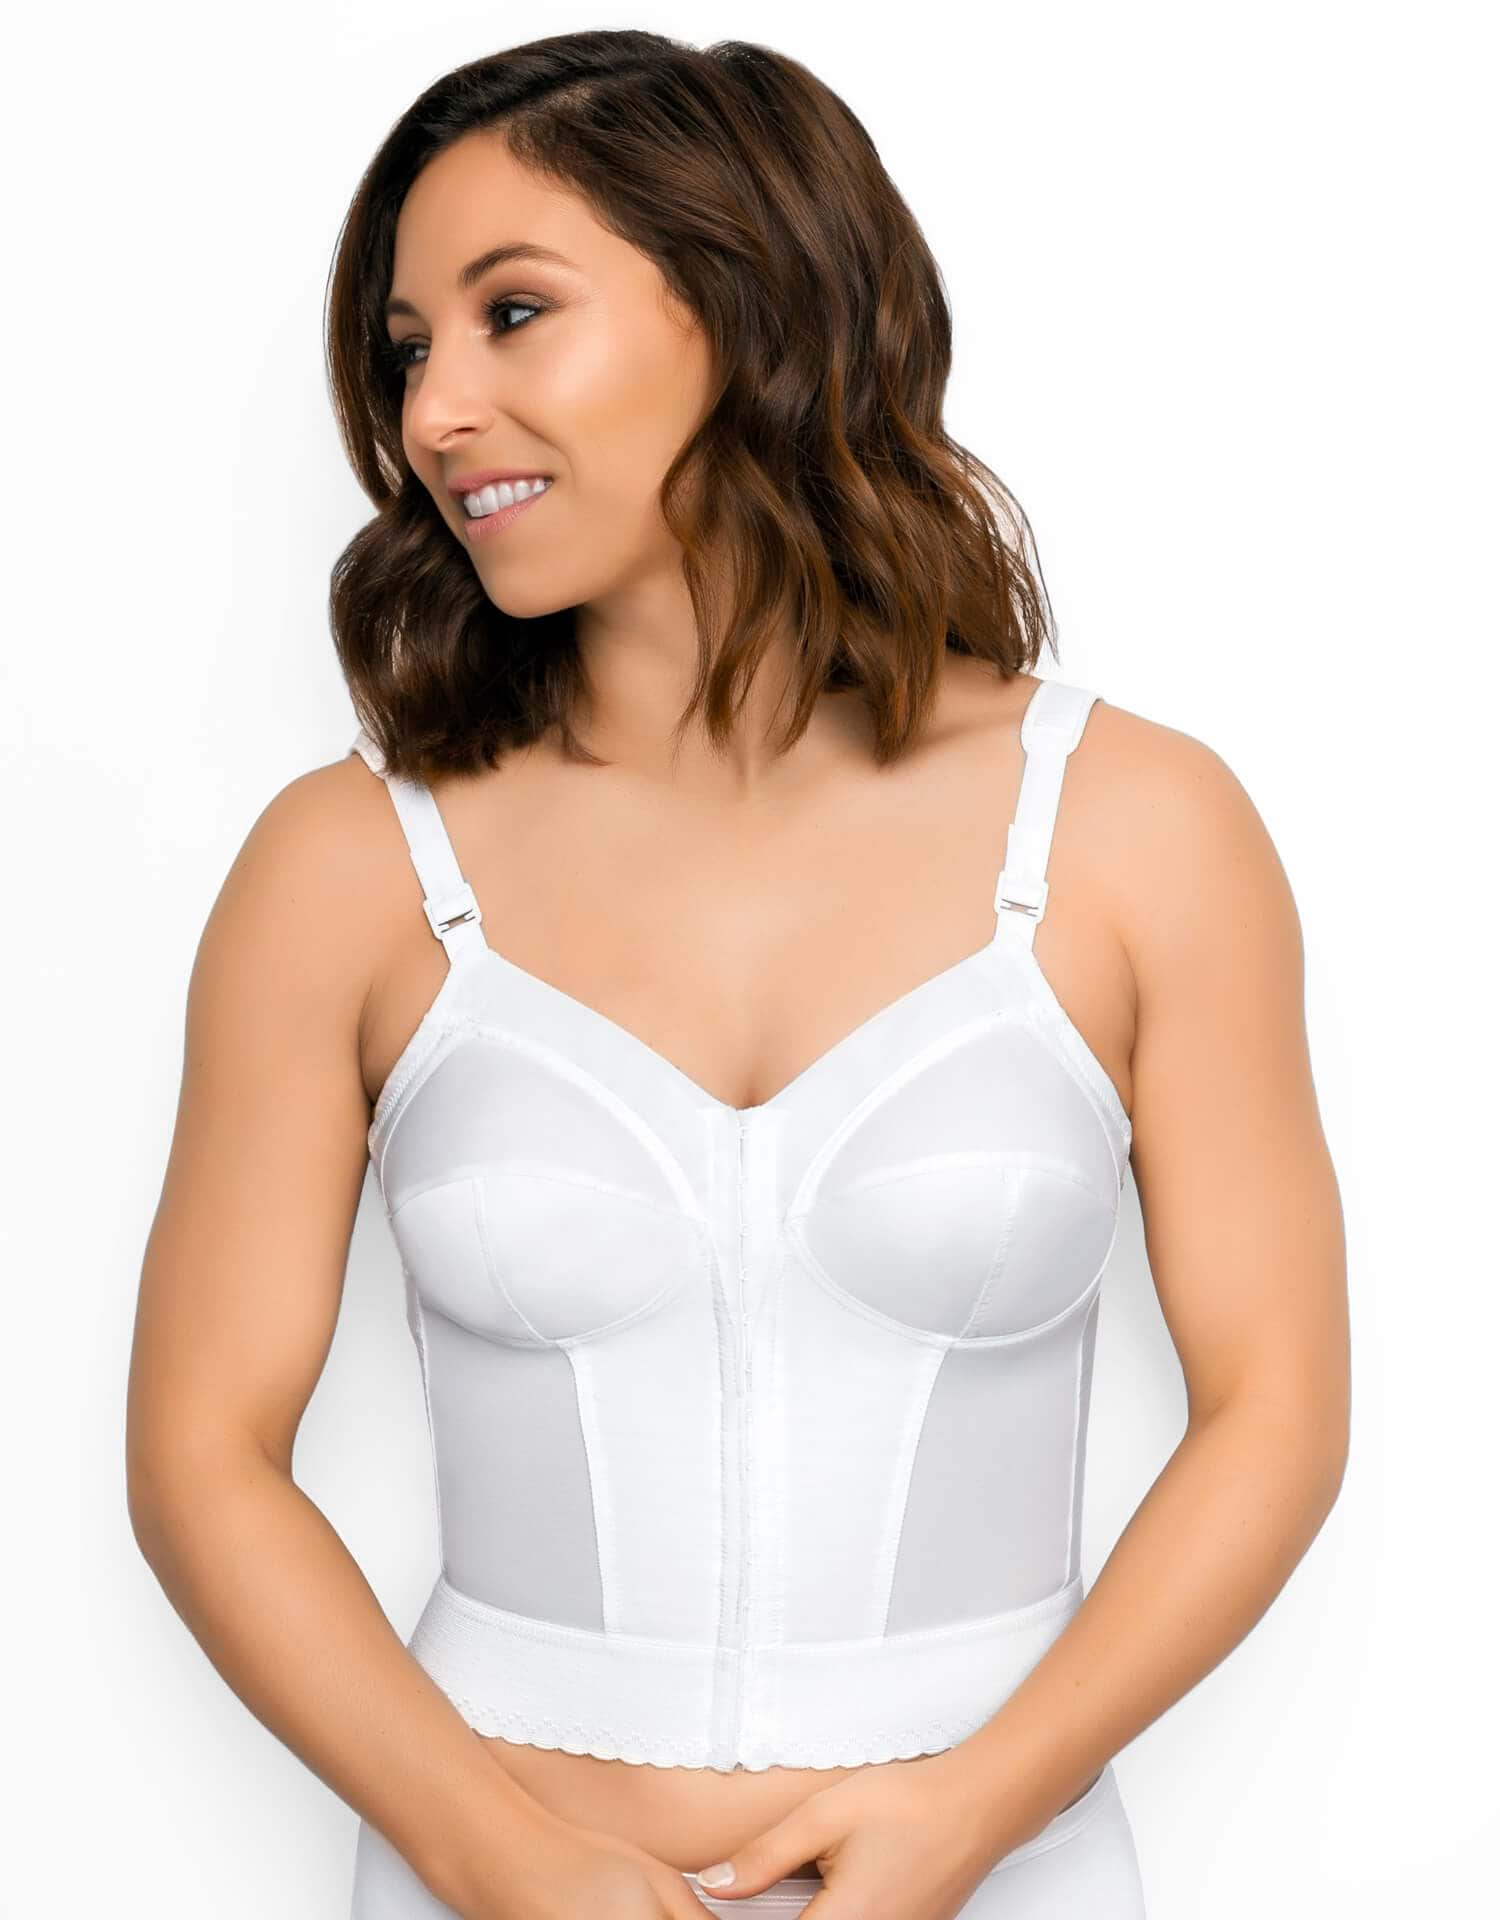 Exquisite Form Fully Women's Slimming Wireless Full-Coverage Bra